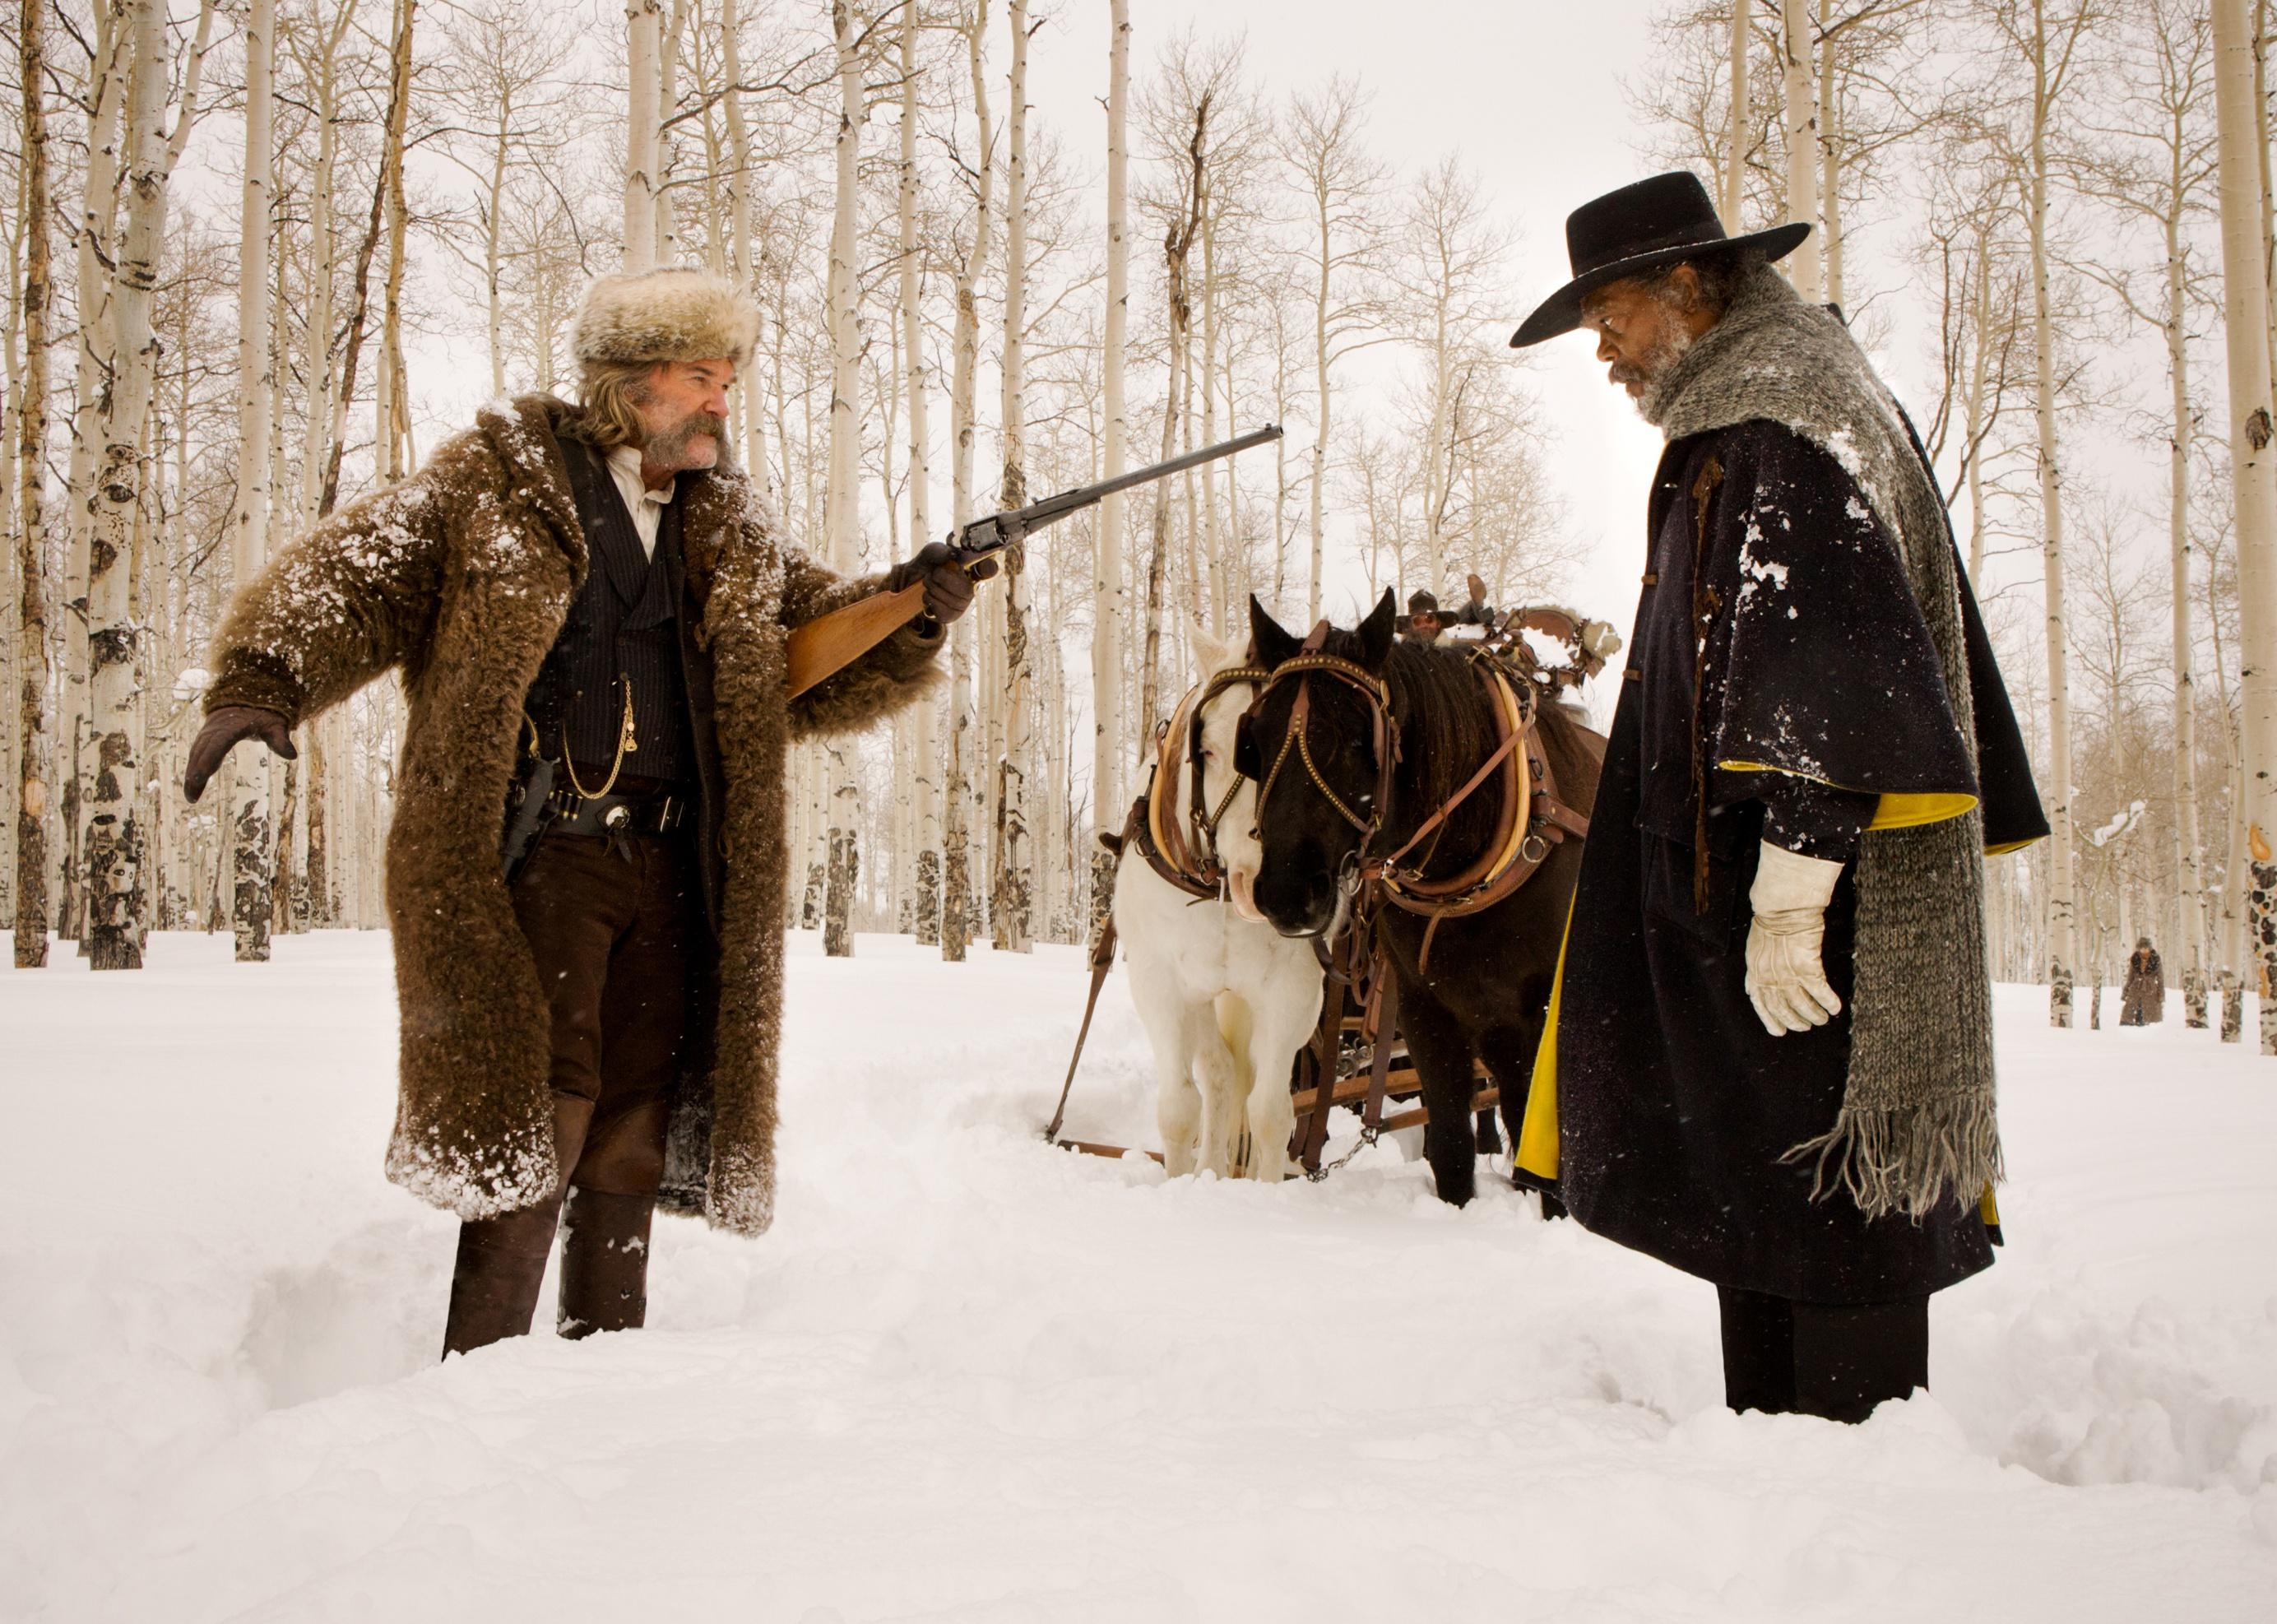 Kurt Russell points a long gun at Samuel L. Jackson with a horse in the background in the snow.